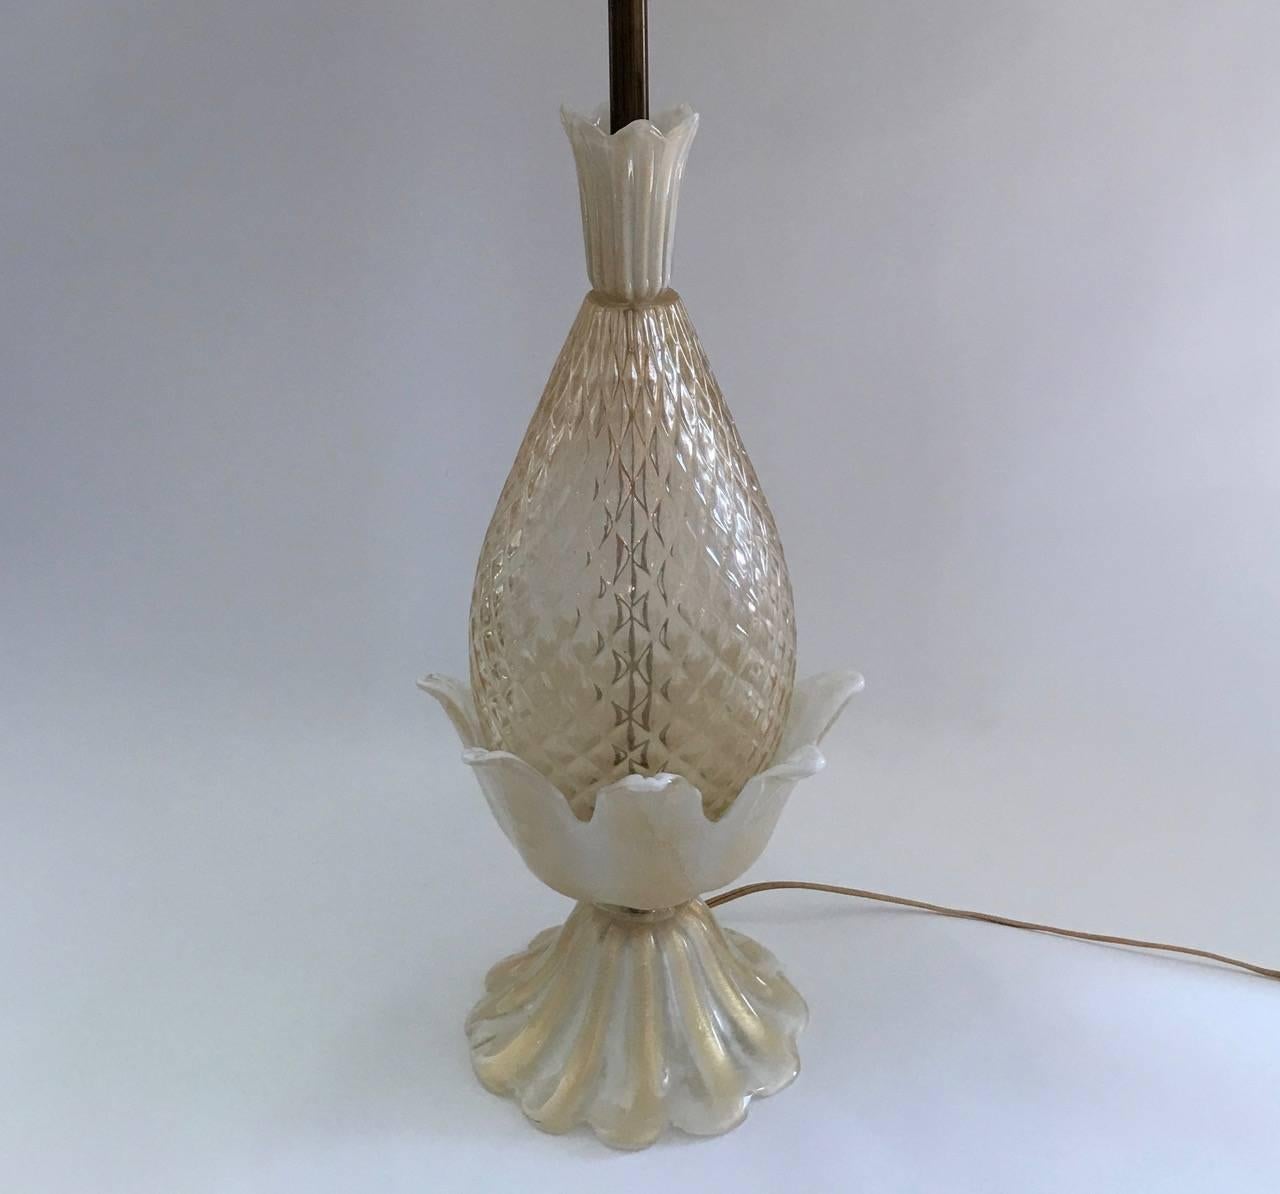 Italian Murano Glass Pineapple Shaped Table Lamp Attributed to Barovier e Toso, Italy